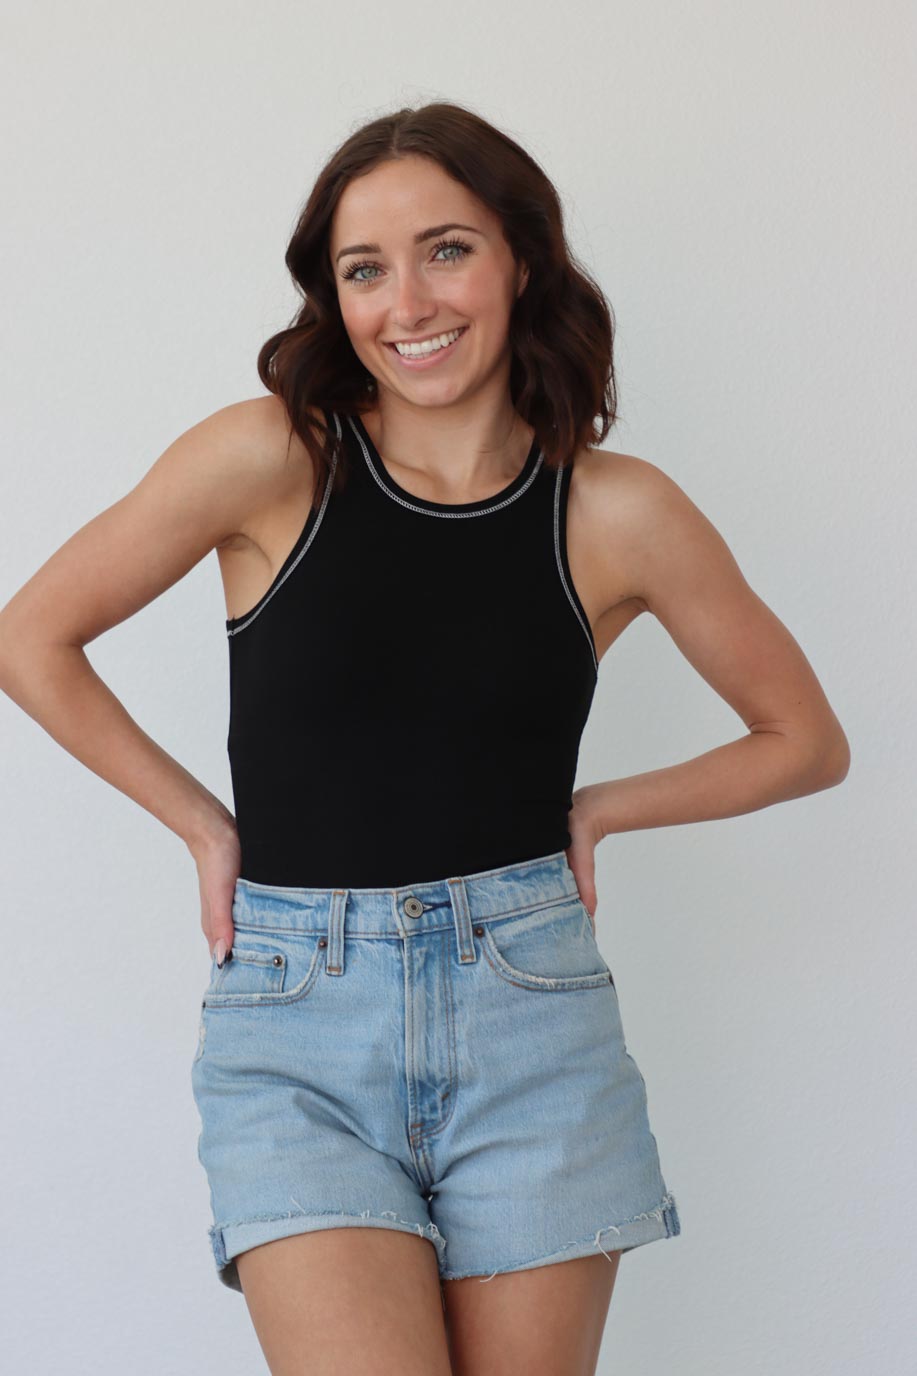 girl wearing black tank top bodysuit with white contrast stitch detailing